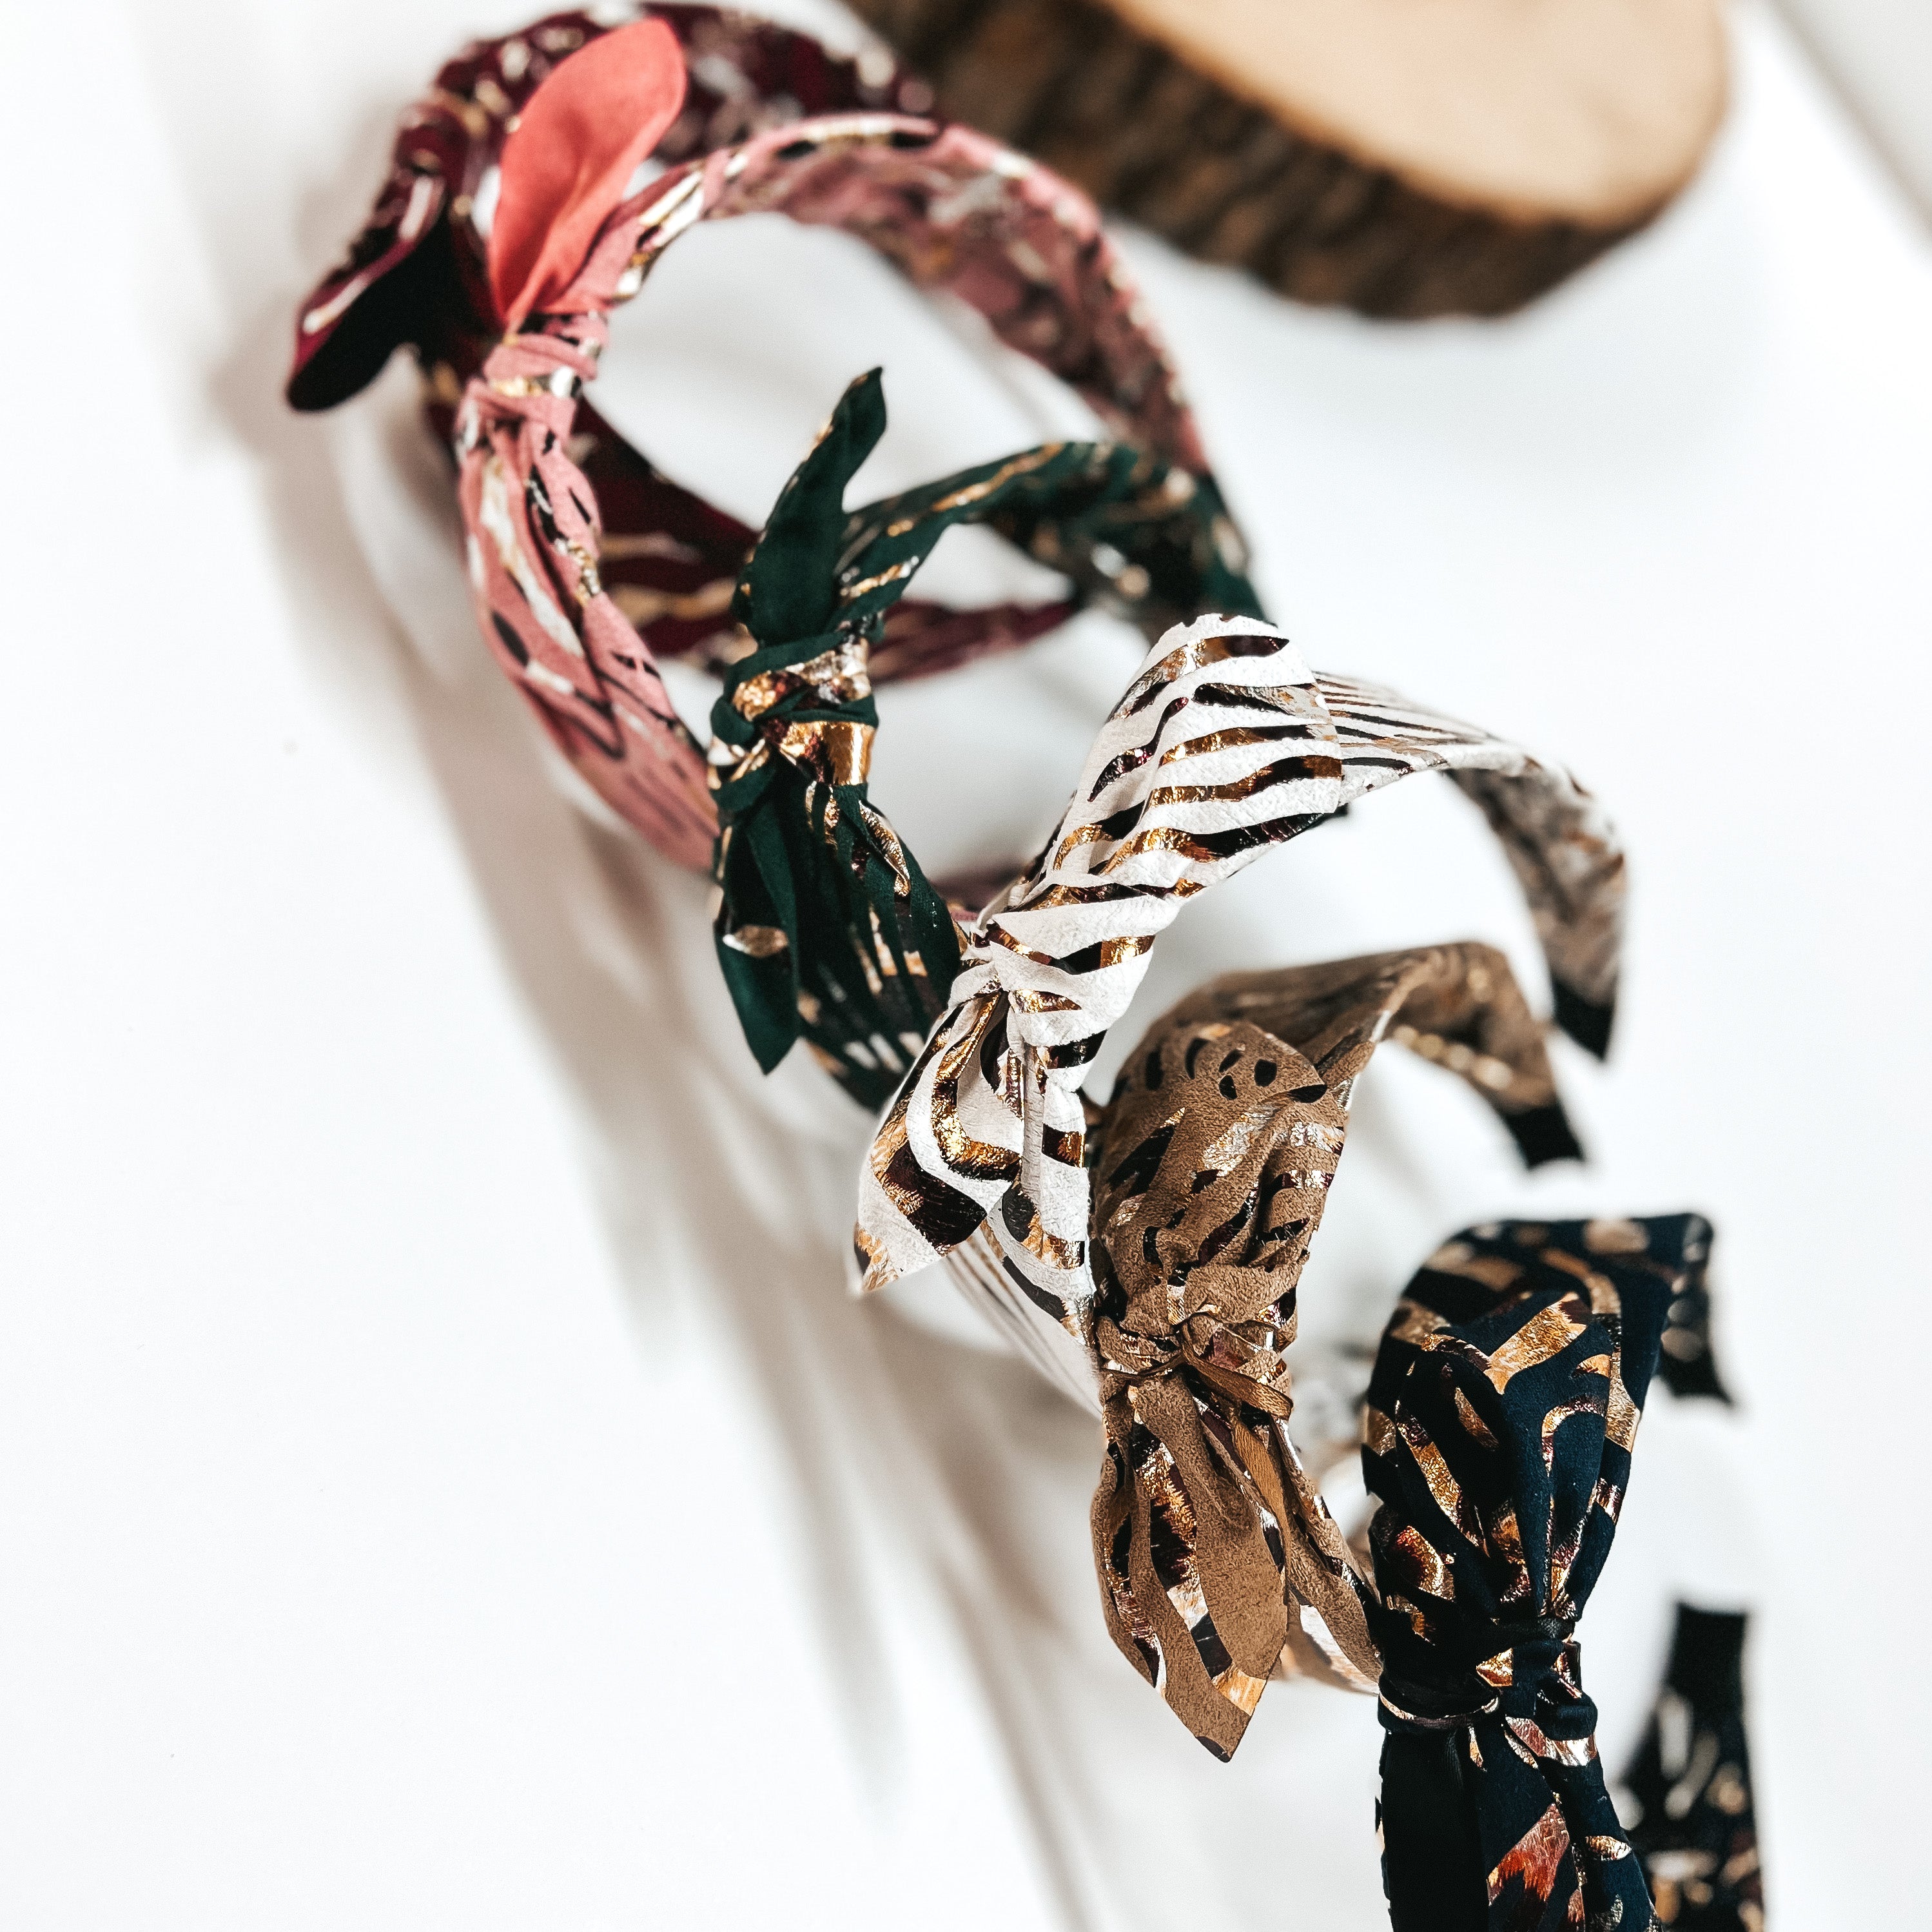 There are six fabric headbands with a bow and gold foil  print in different colors. From top to bottom; burgundy, light pink, dark green, white, tan, and black.